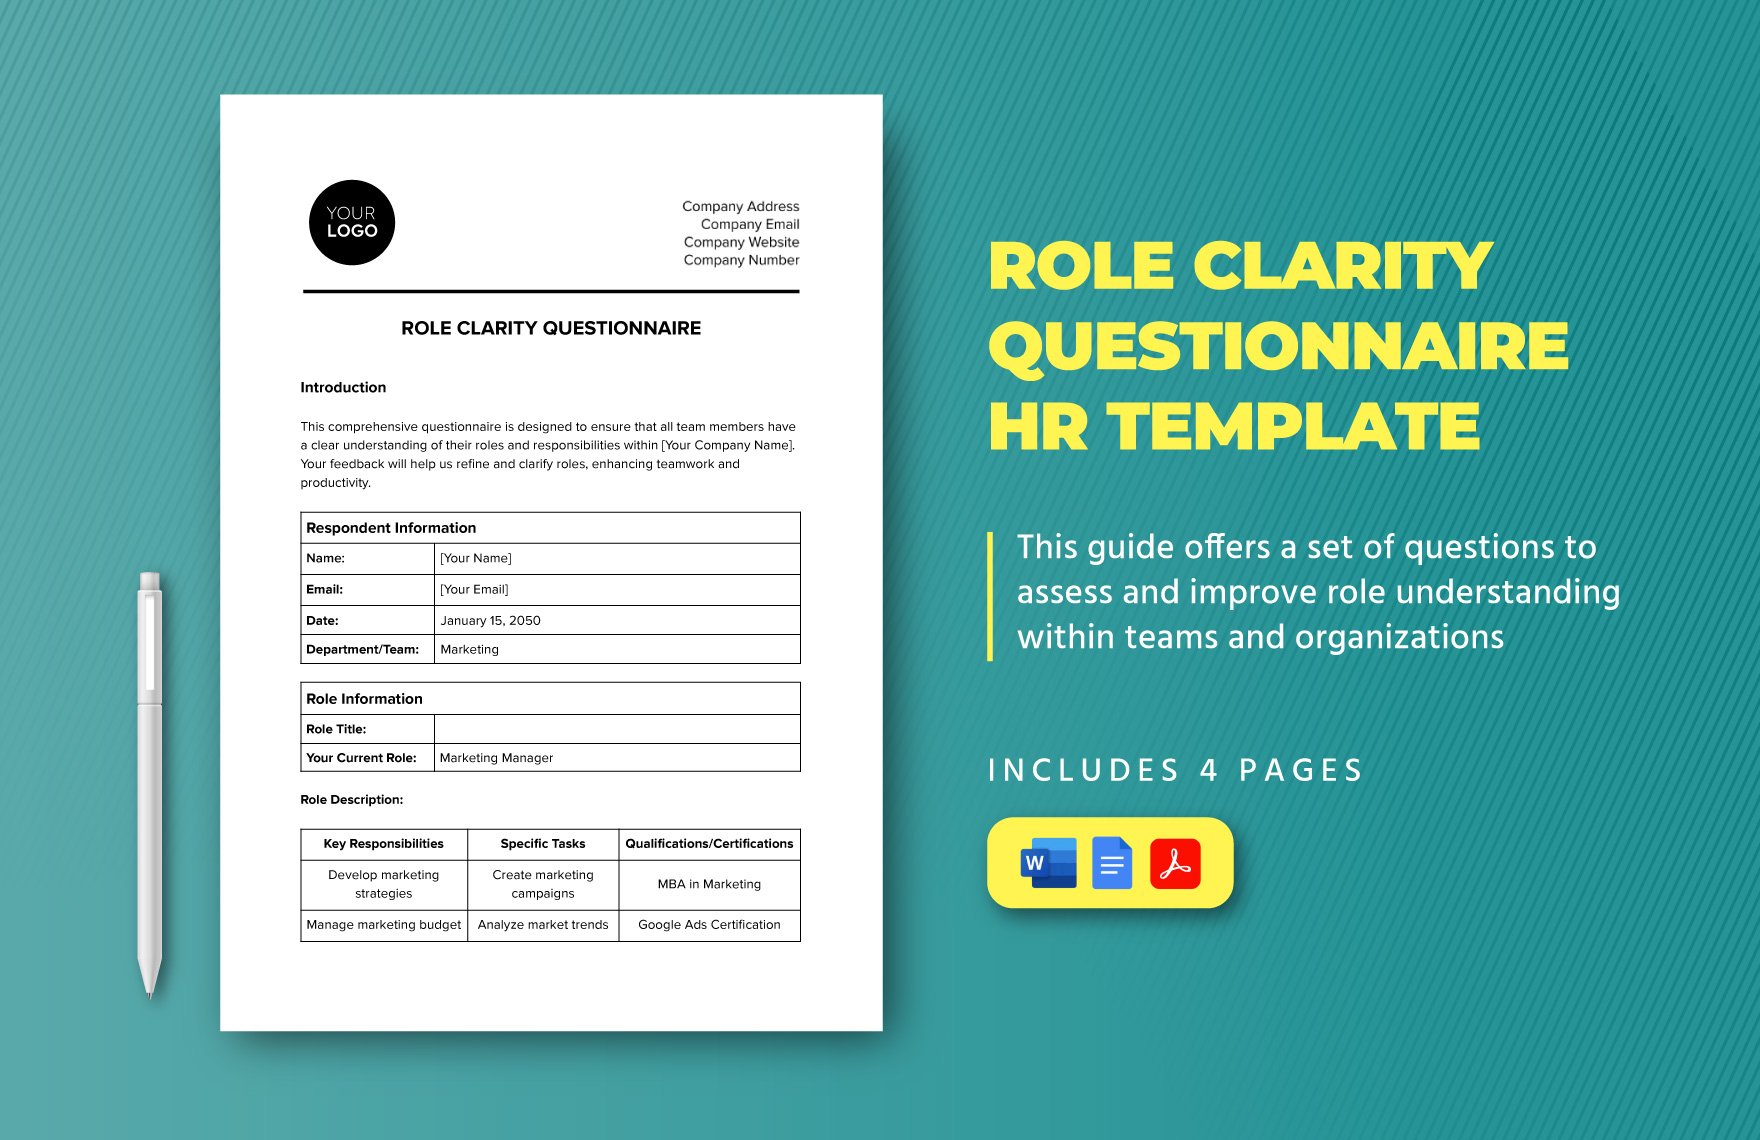 Role Clarity Questionnaire HR Template